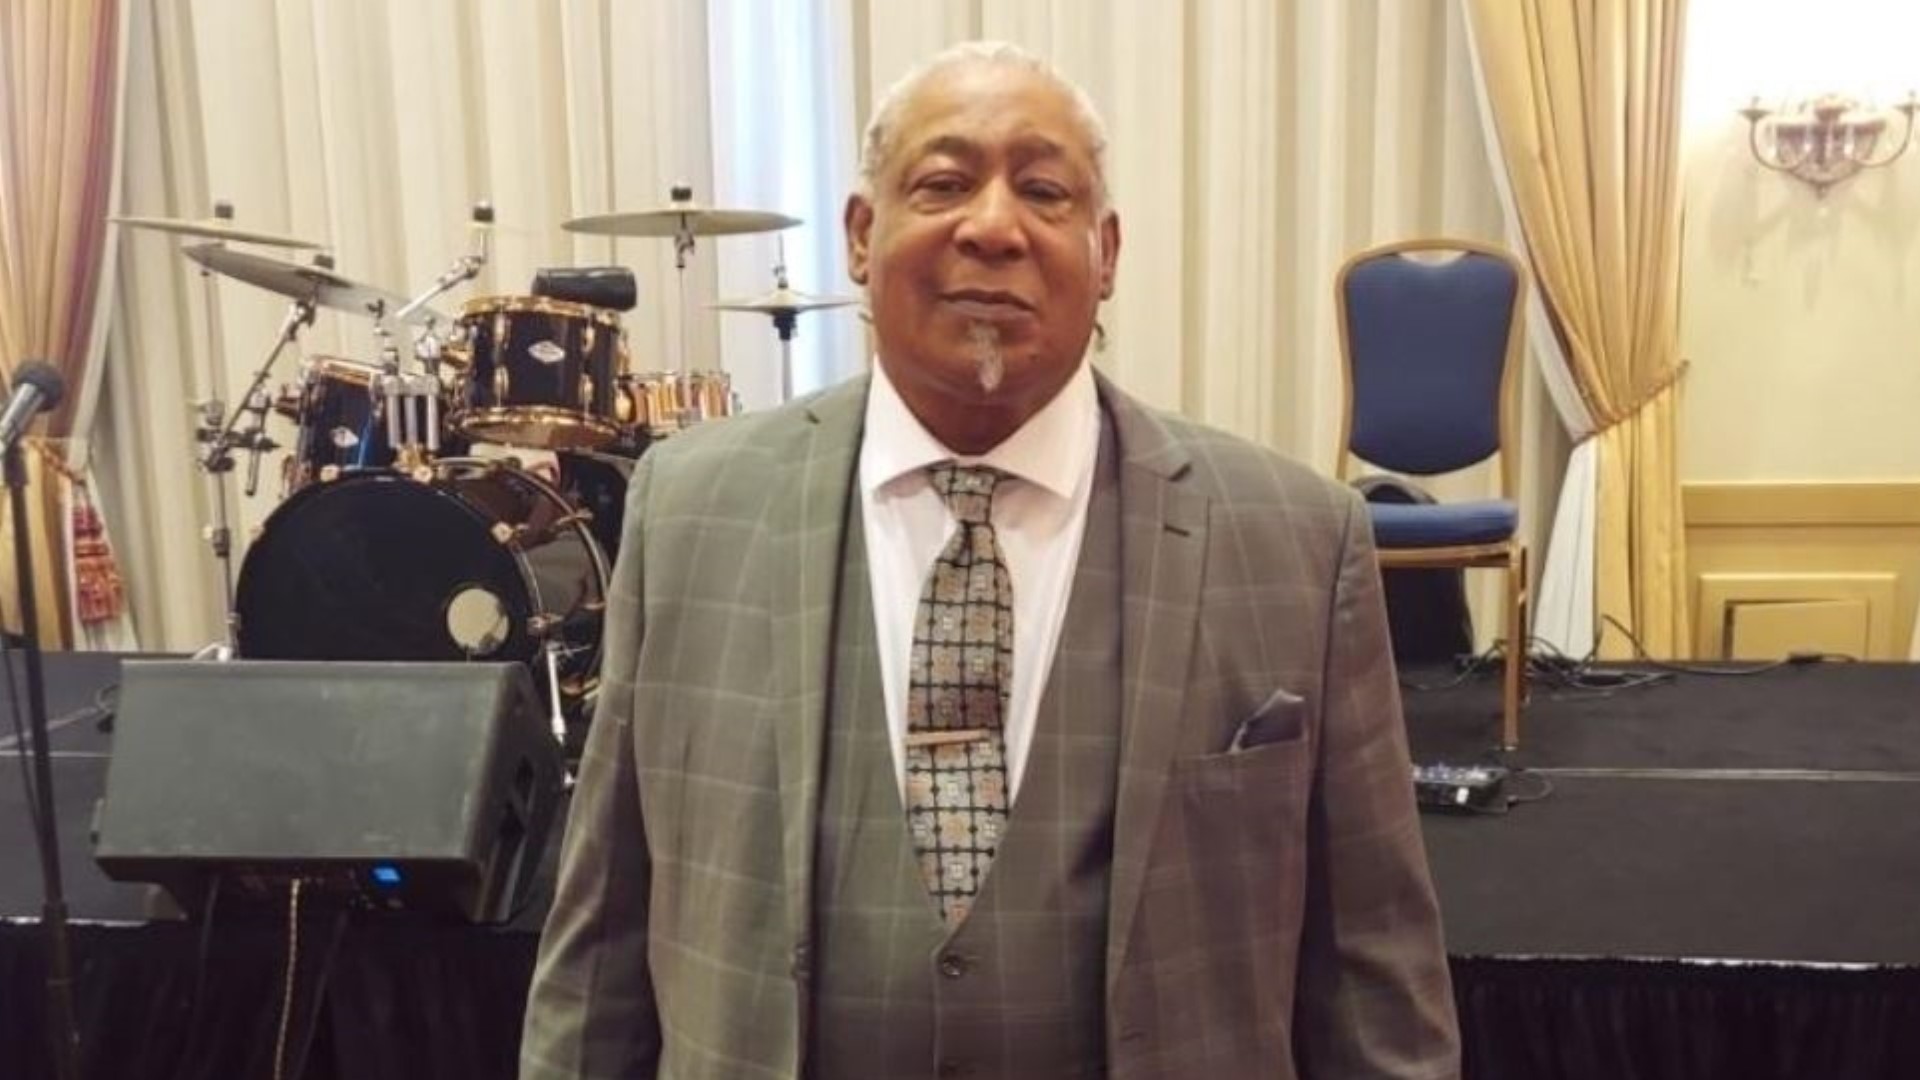 The Atlanta City Council approved a settlement to the family of Johnny Hollman. The 62-year-old died after being tased following a traffic accident last August.